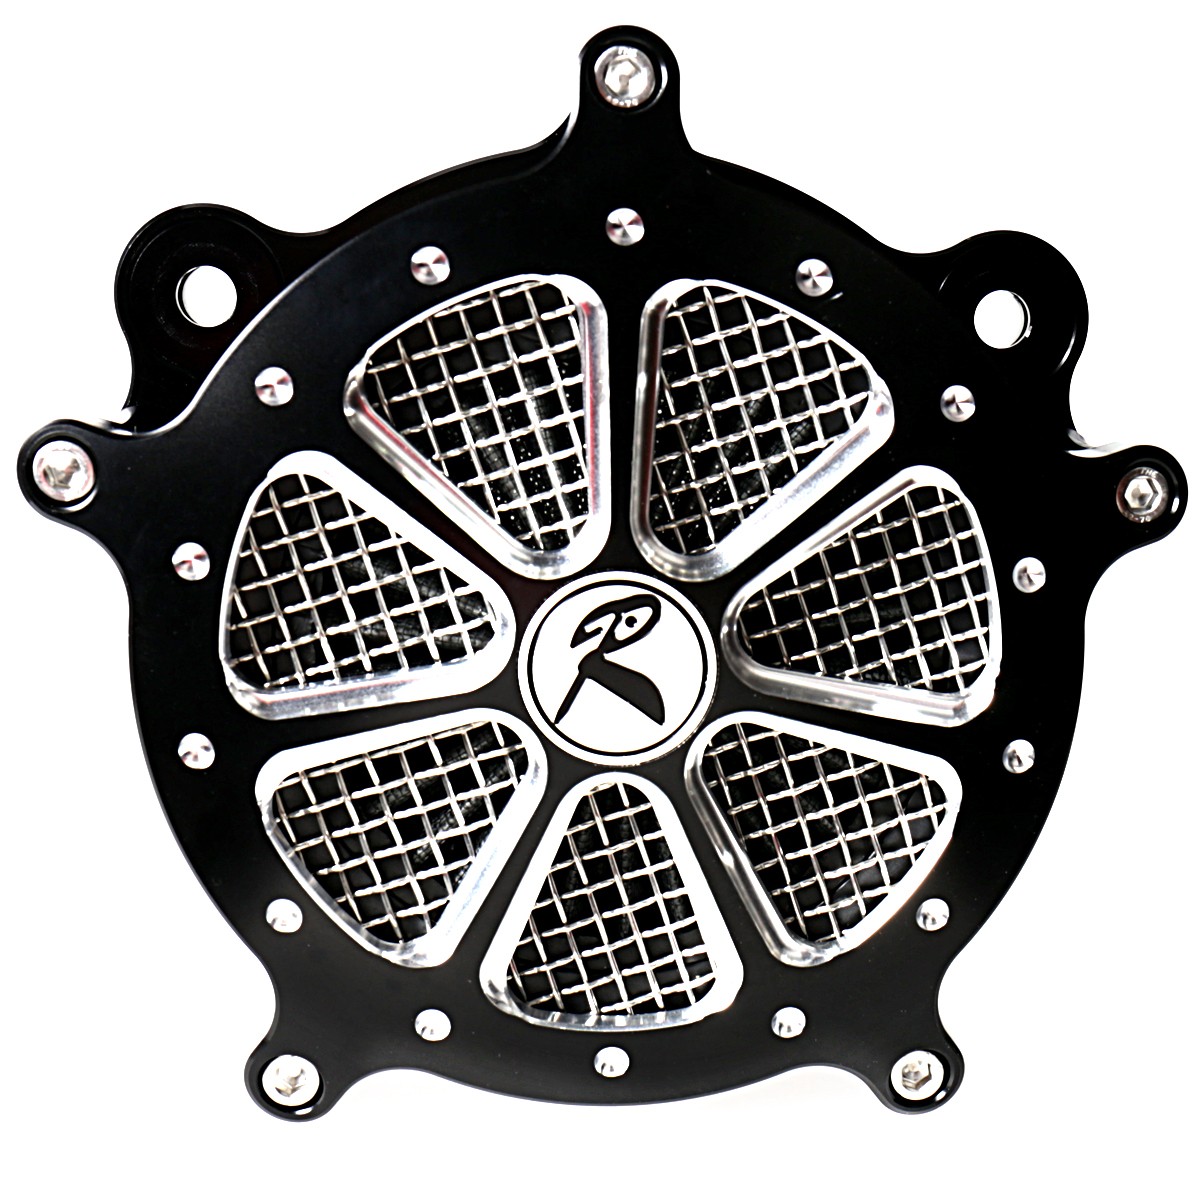 Shallow Cut Billet Aluminum Air Cleaner Intake Filter System Fit For Harley Softail Dyna 1993-2013 Models